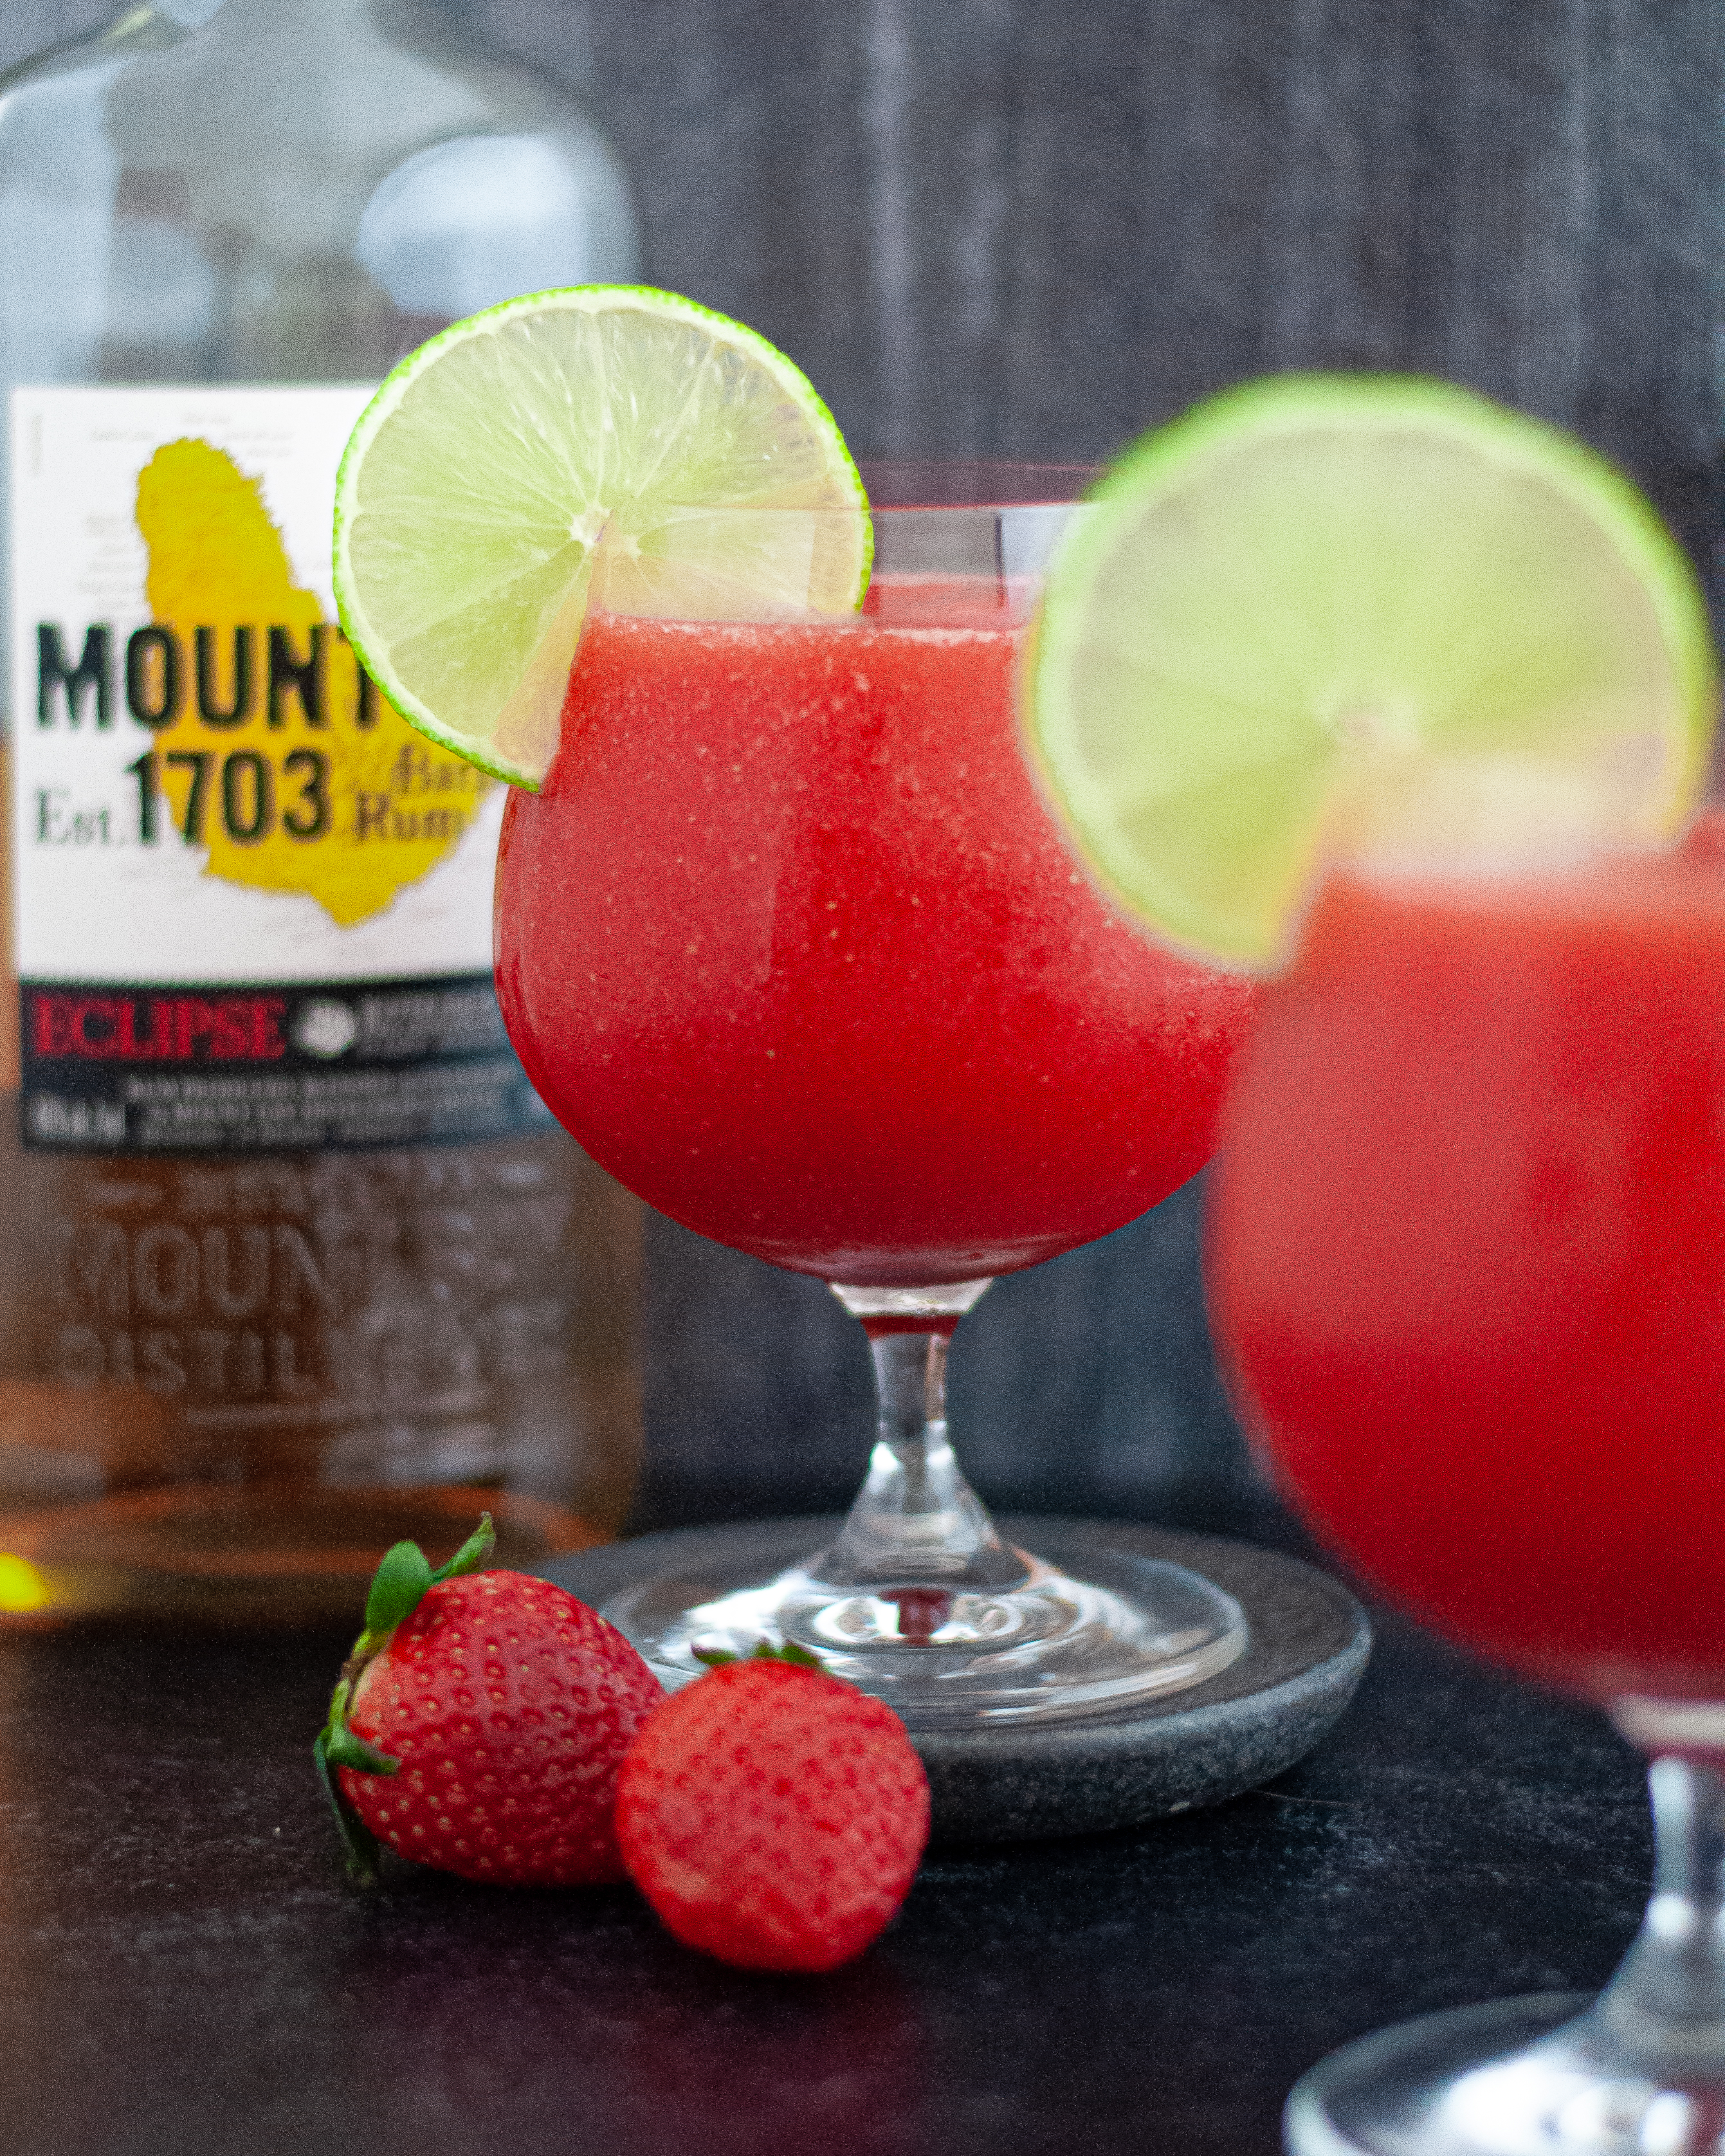 Two glasses of this Frozen Strawberry Daiquiri Recipe served with slices of lime, showcasing the daiquiri ingredients of rum, strawberries, and limes.